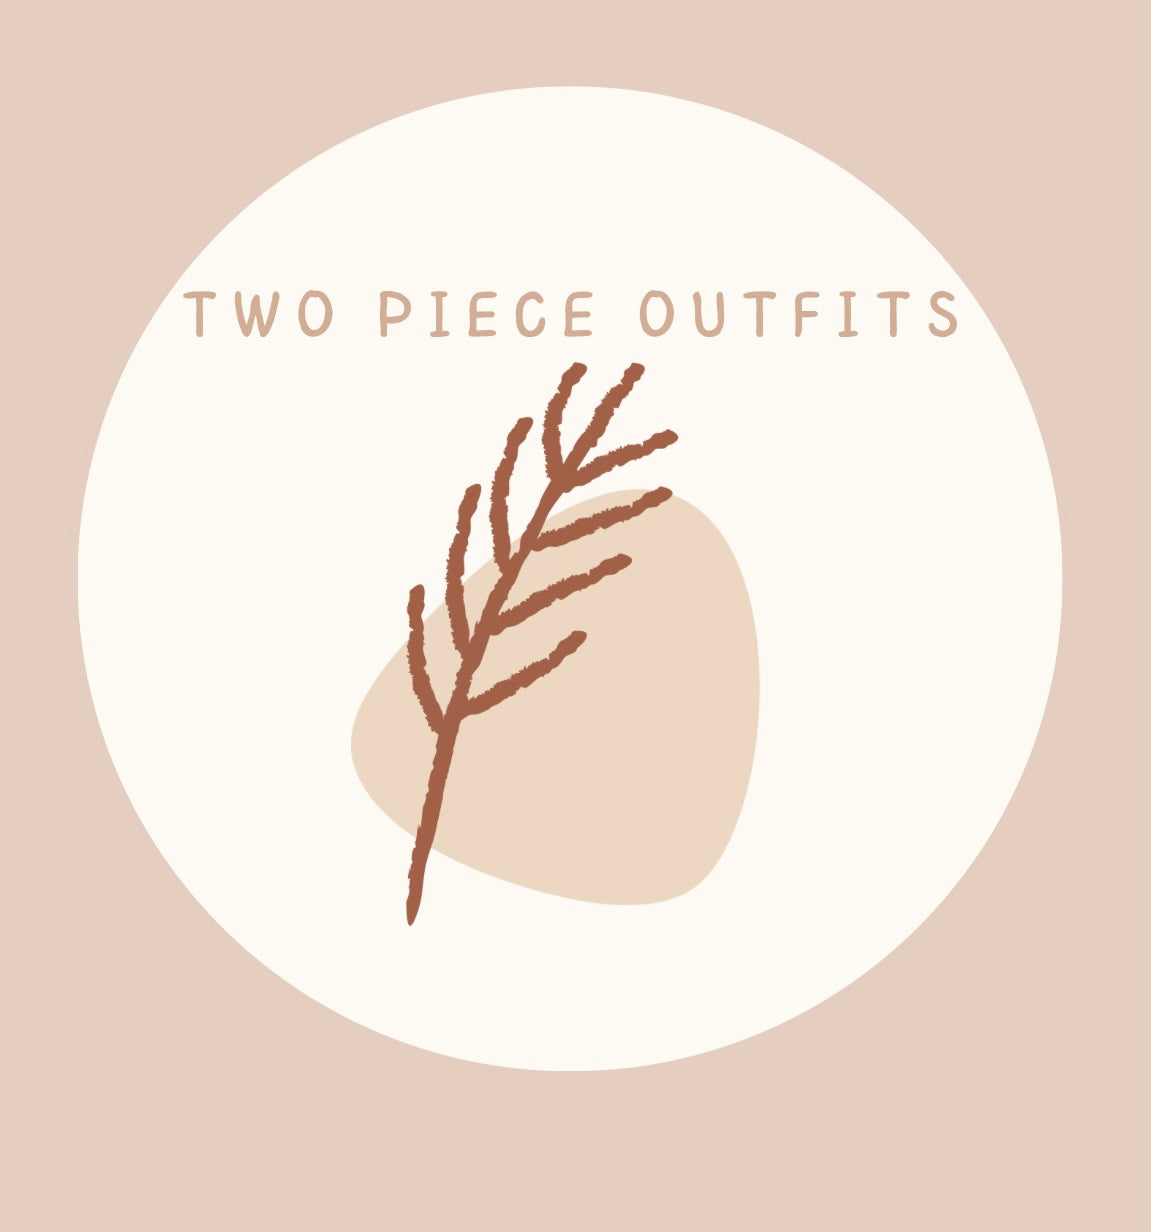 Two Piece Outfits